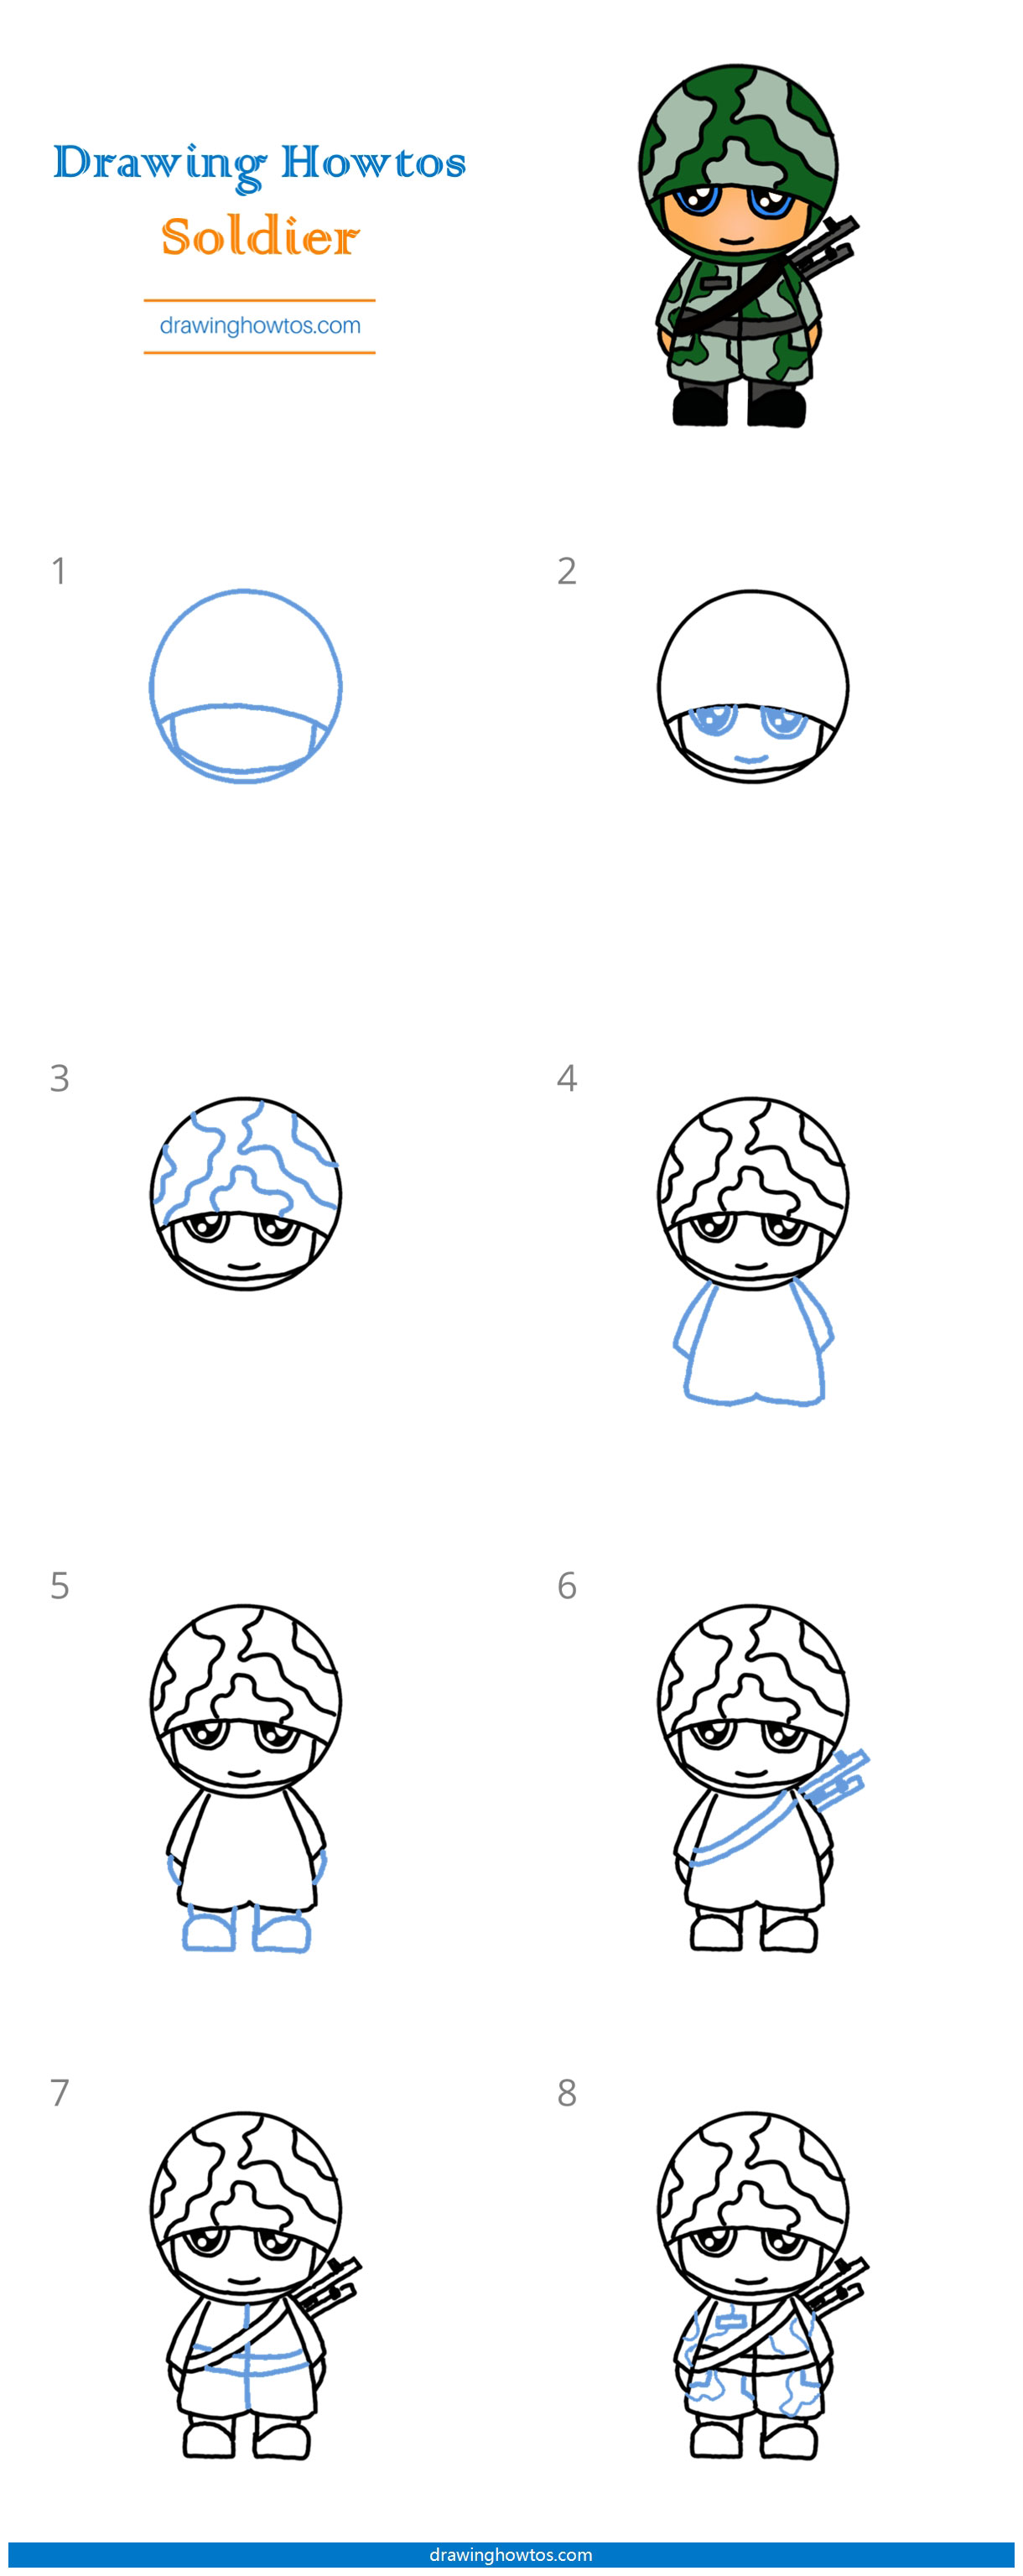 How to Draw a Soldier Step by Step